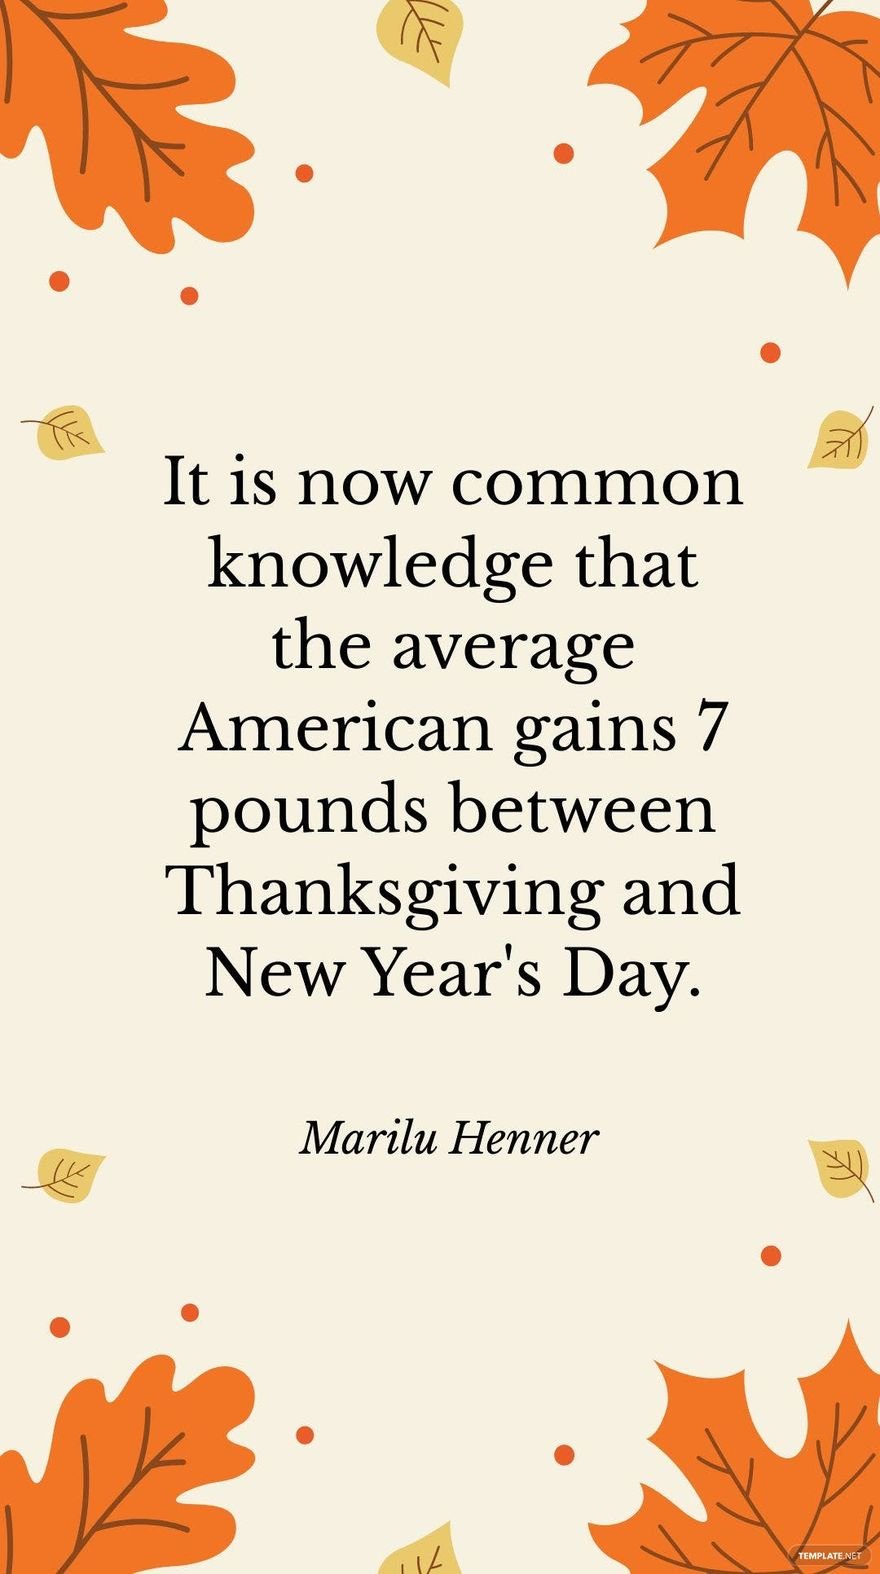 Free Marilu Henner - It is now common knowledge that the average American gains 7 pounds between Thanksgiving and New Year's Day.